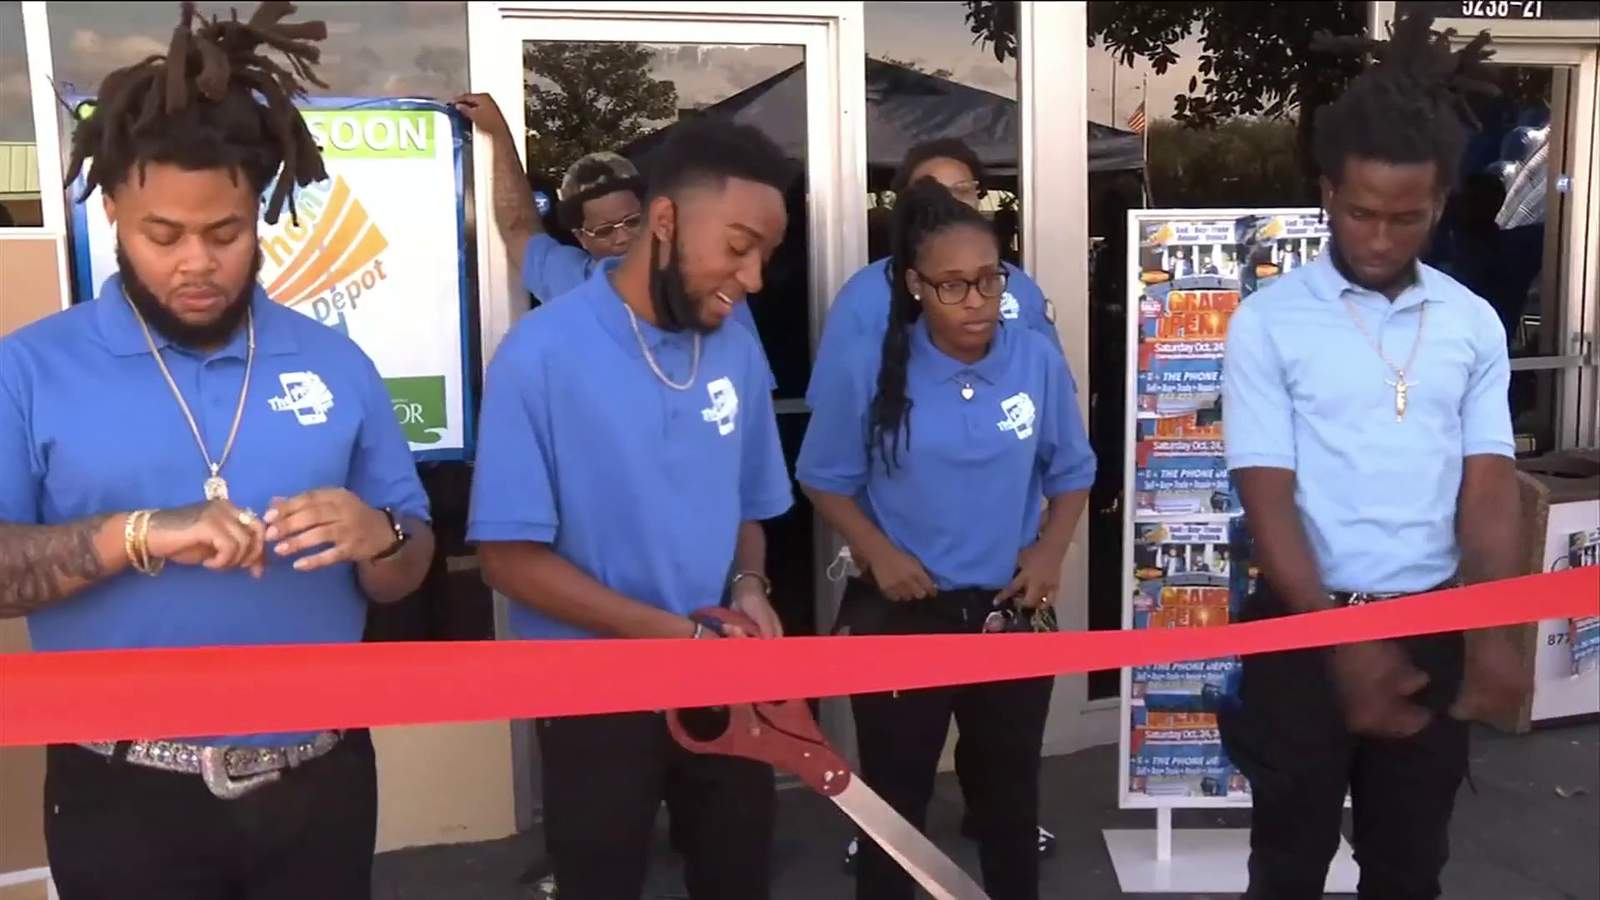 After stint in prison, Jacksonville man continues recovery journey by opening 2nd phone store